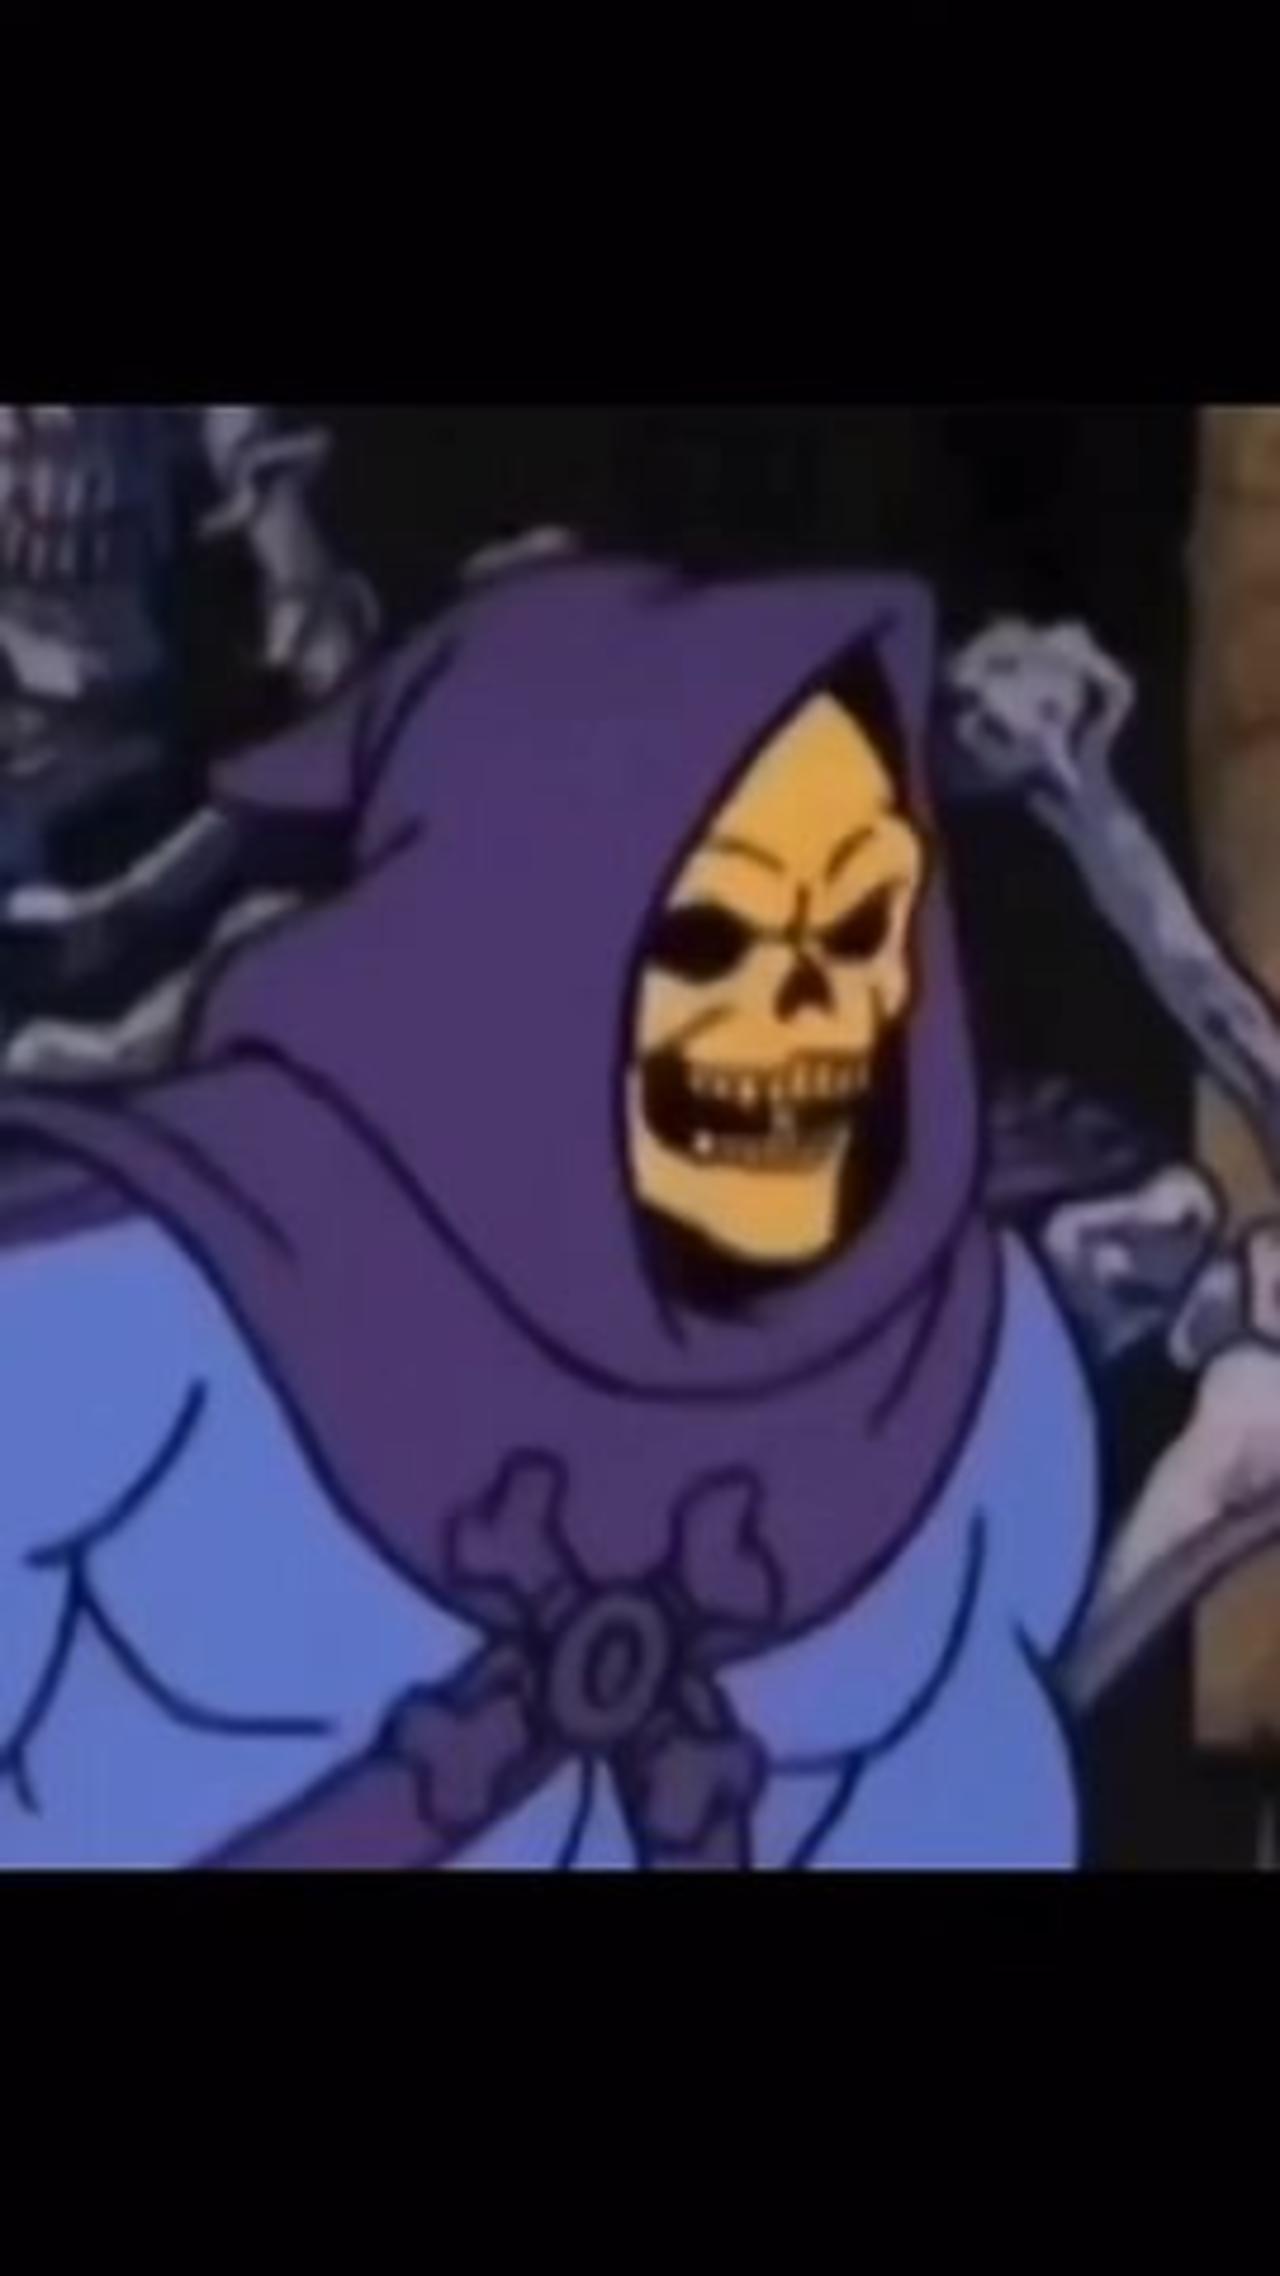 Life lesson from skeletor part 2